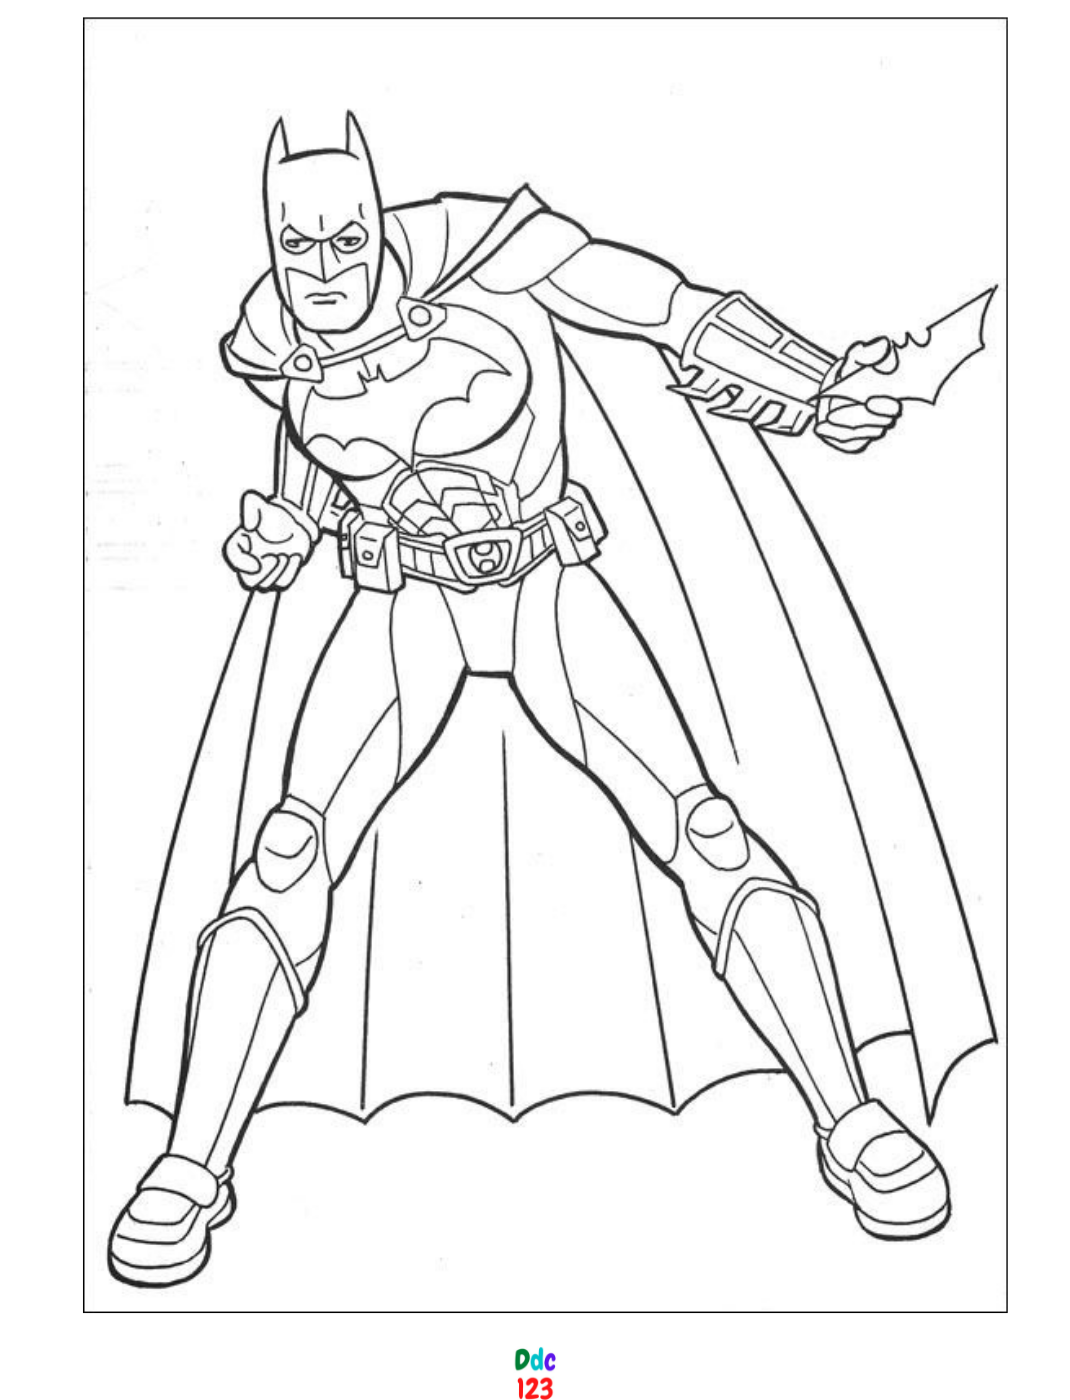 Batman Coloring Pages to print for kids - DDC123